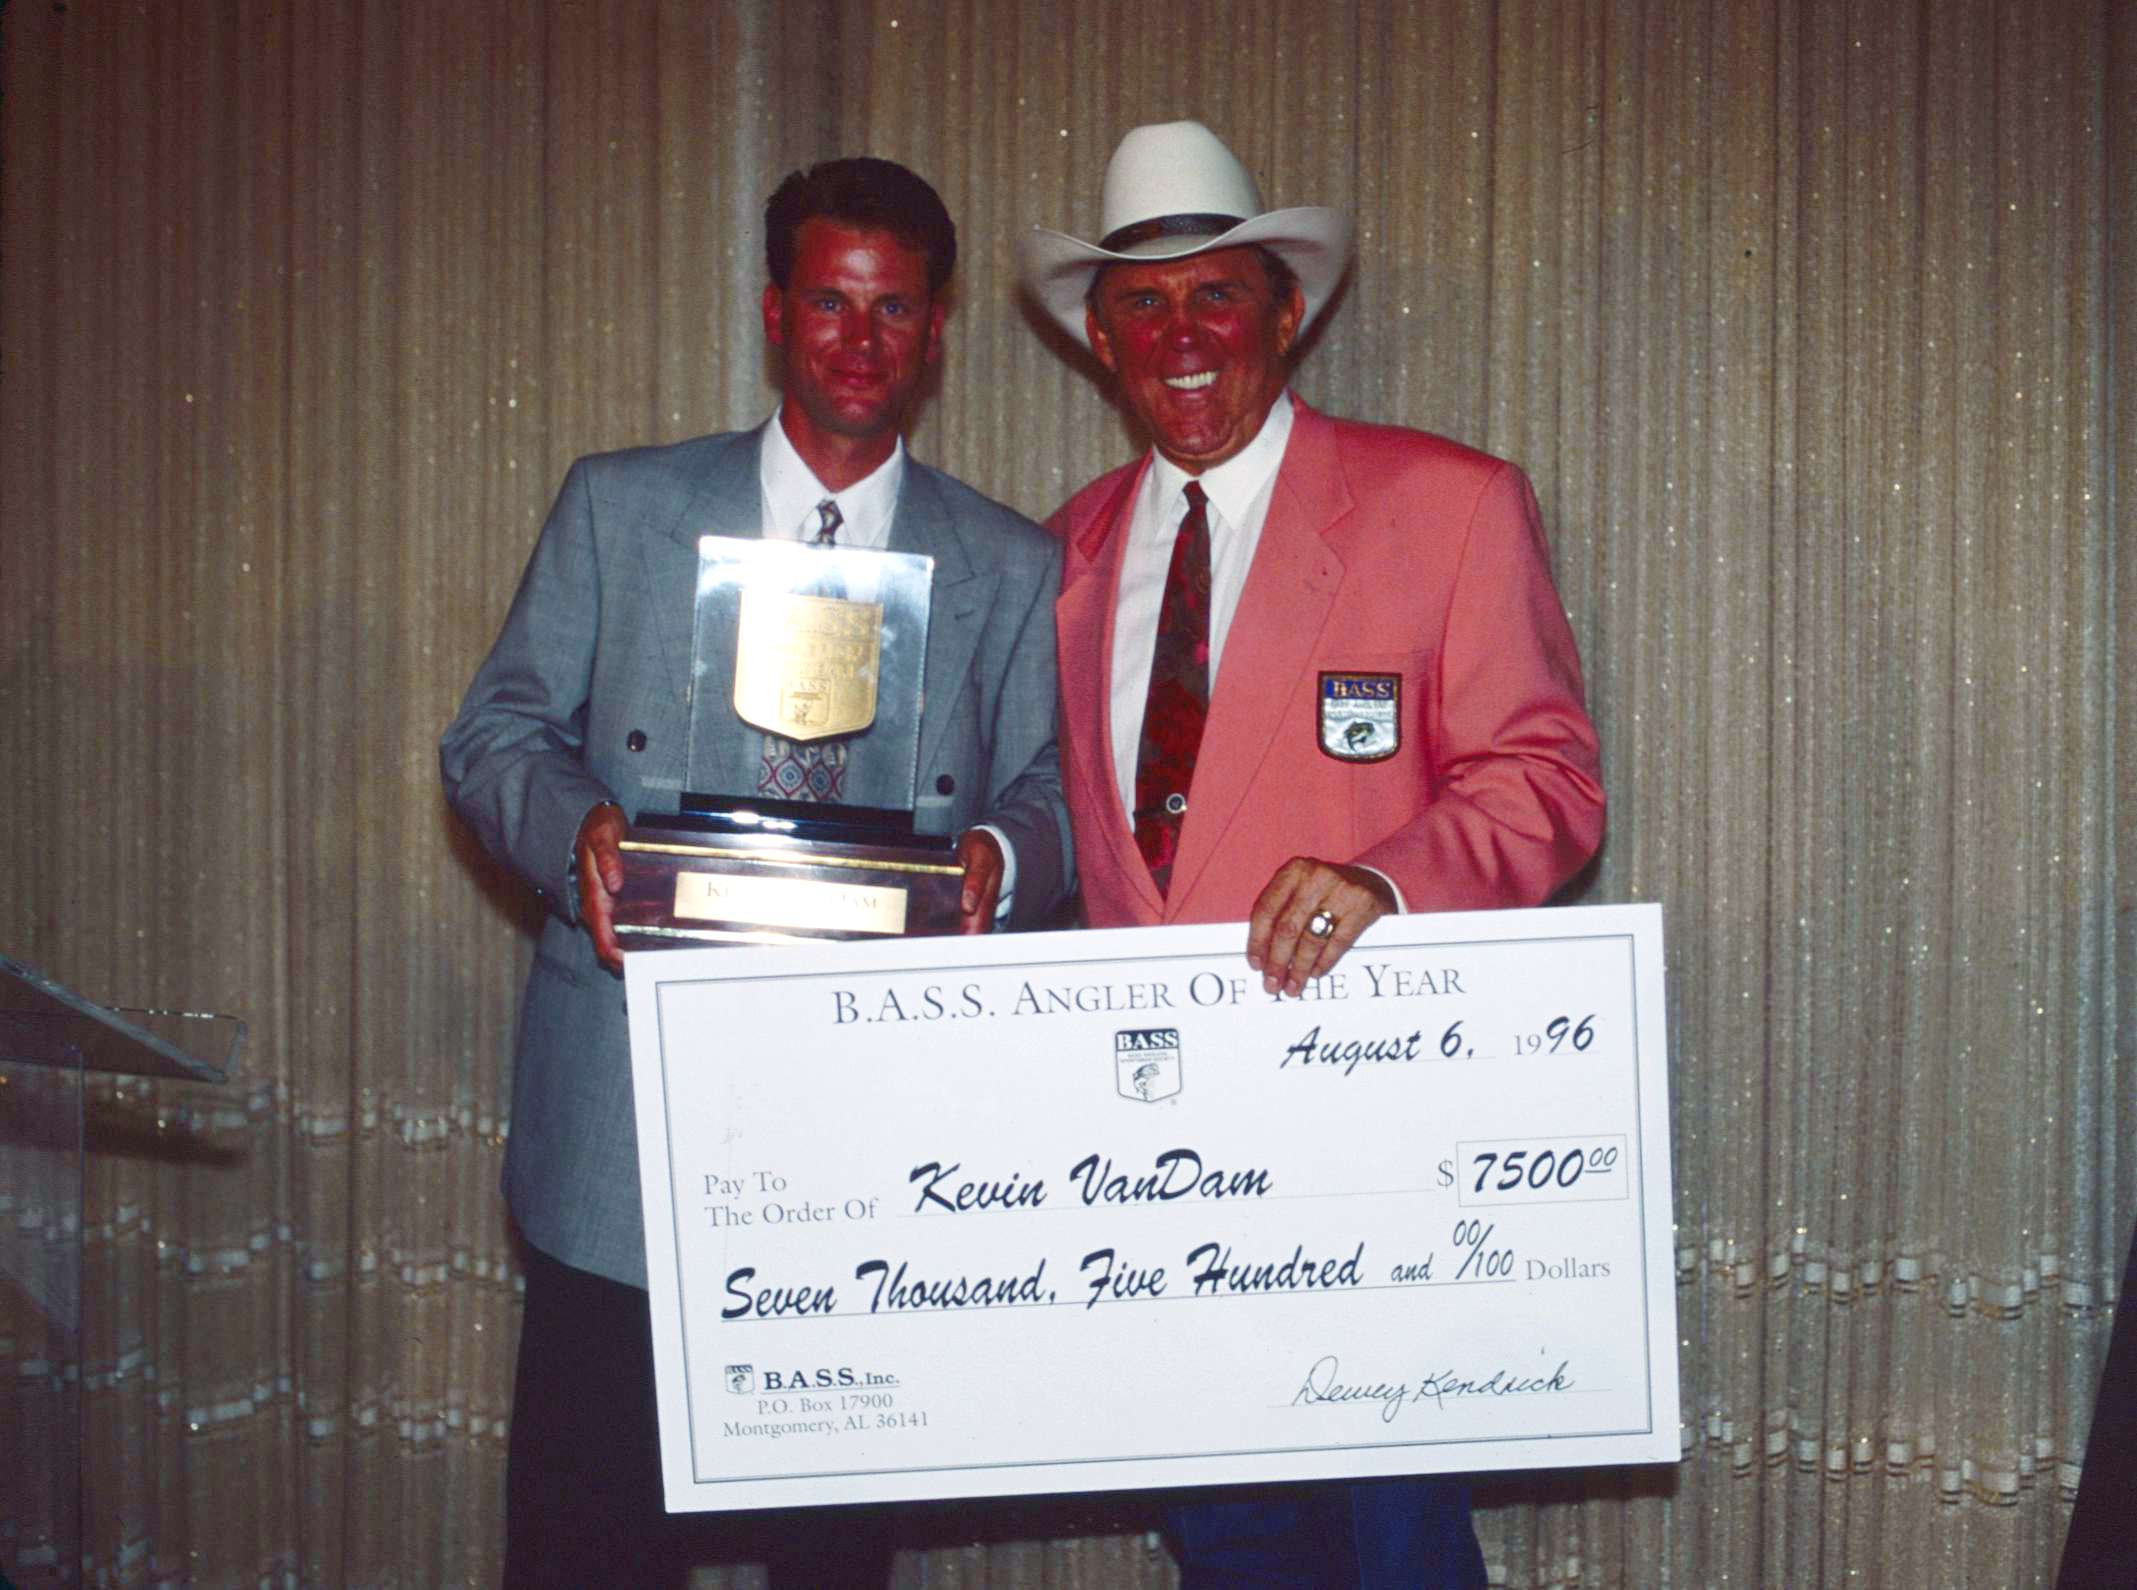 Ray Scott presents Kevin VanDam with his second Angler of the Year trophy in 1996. 